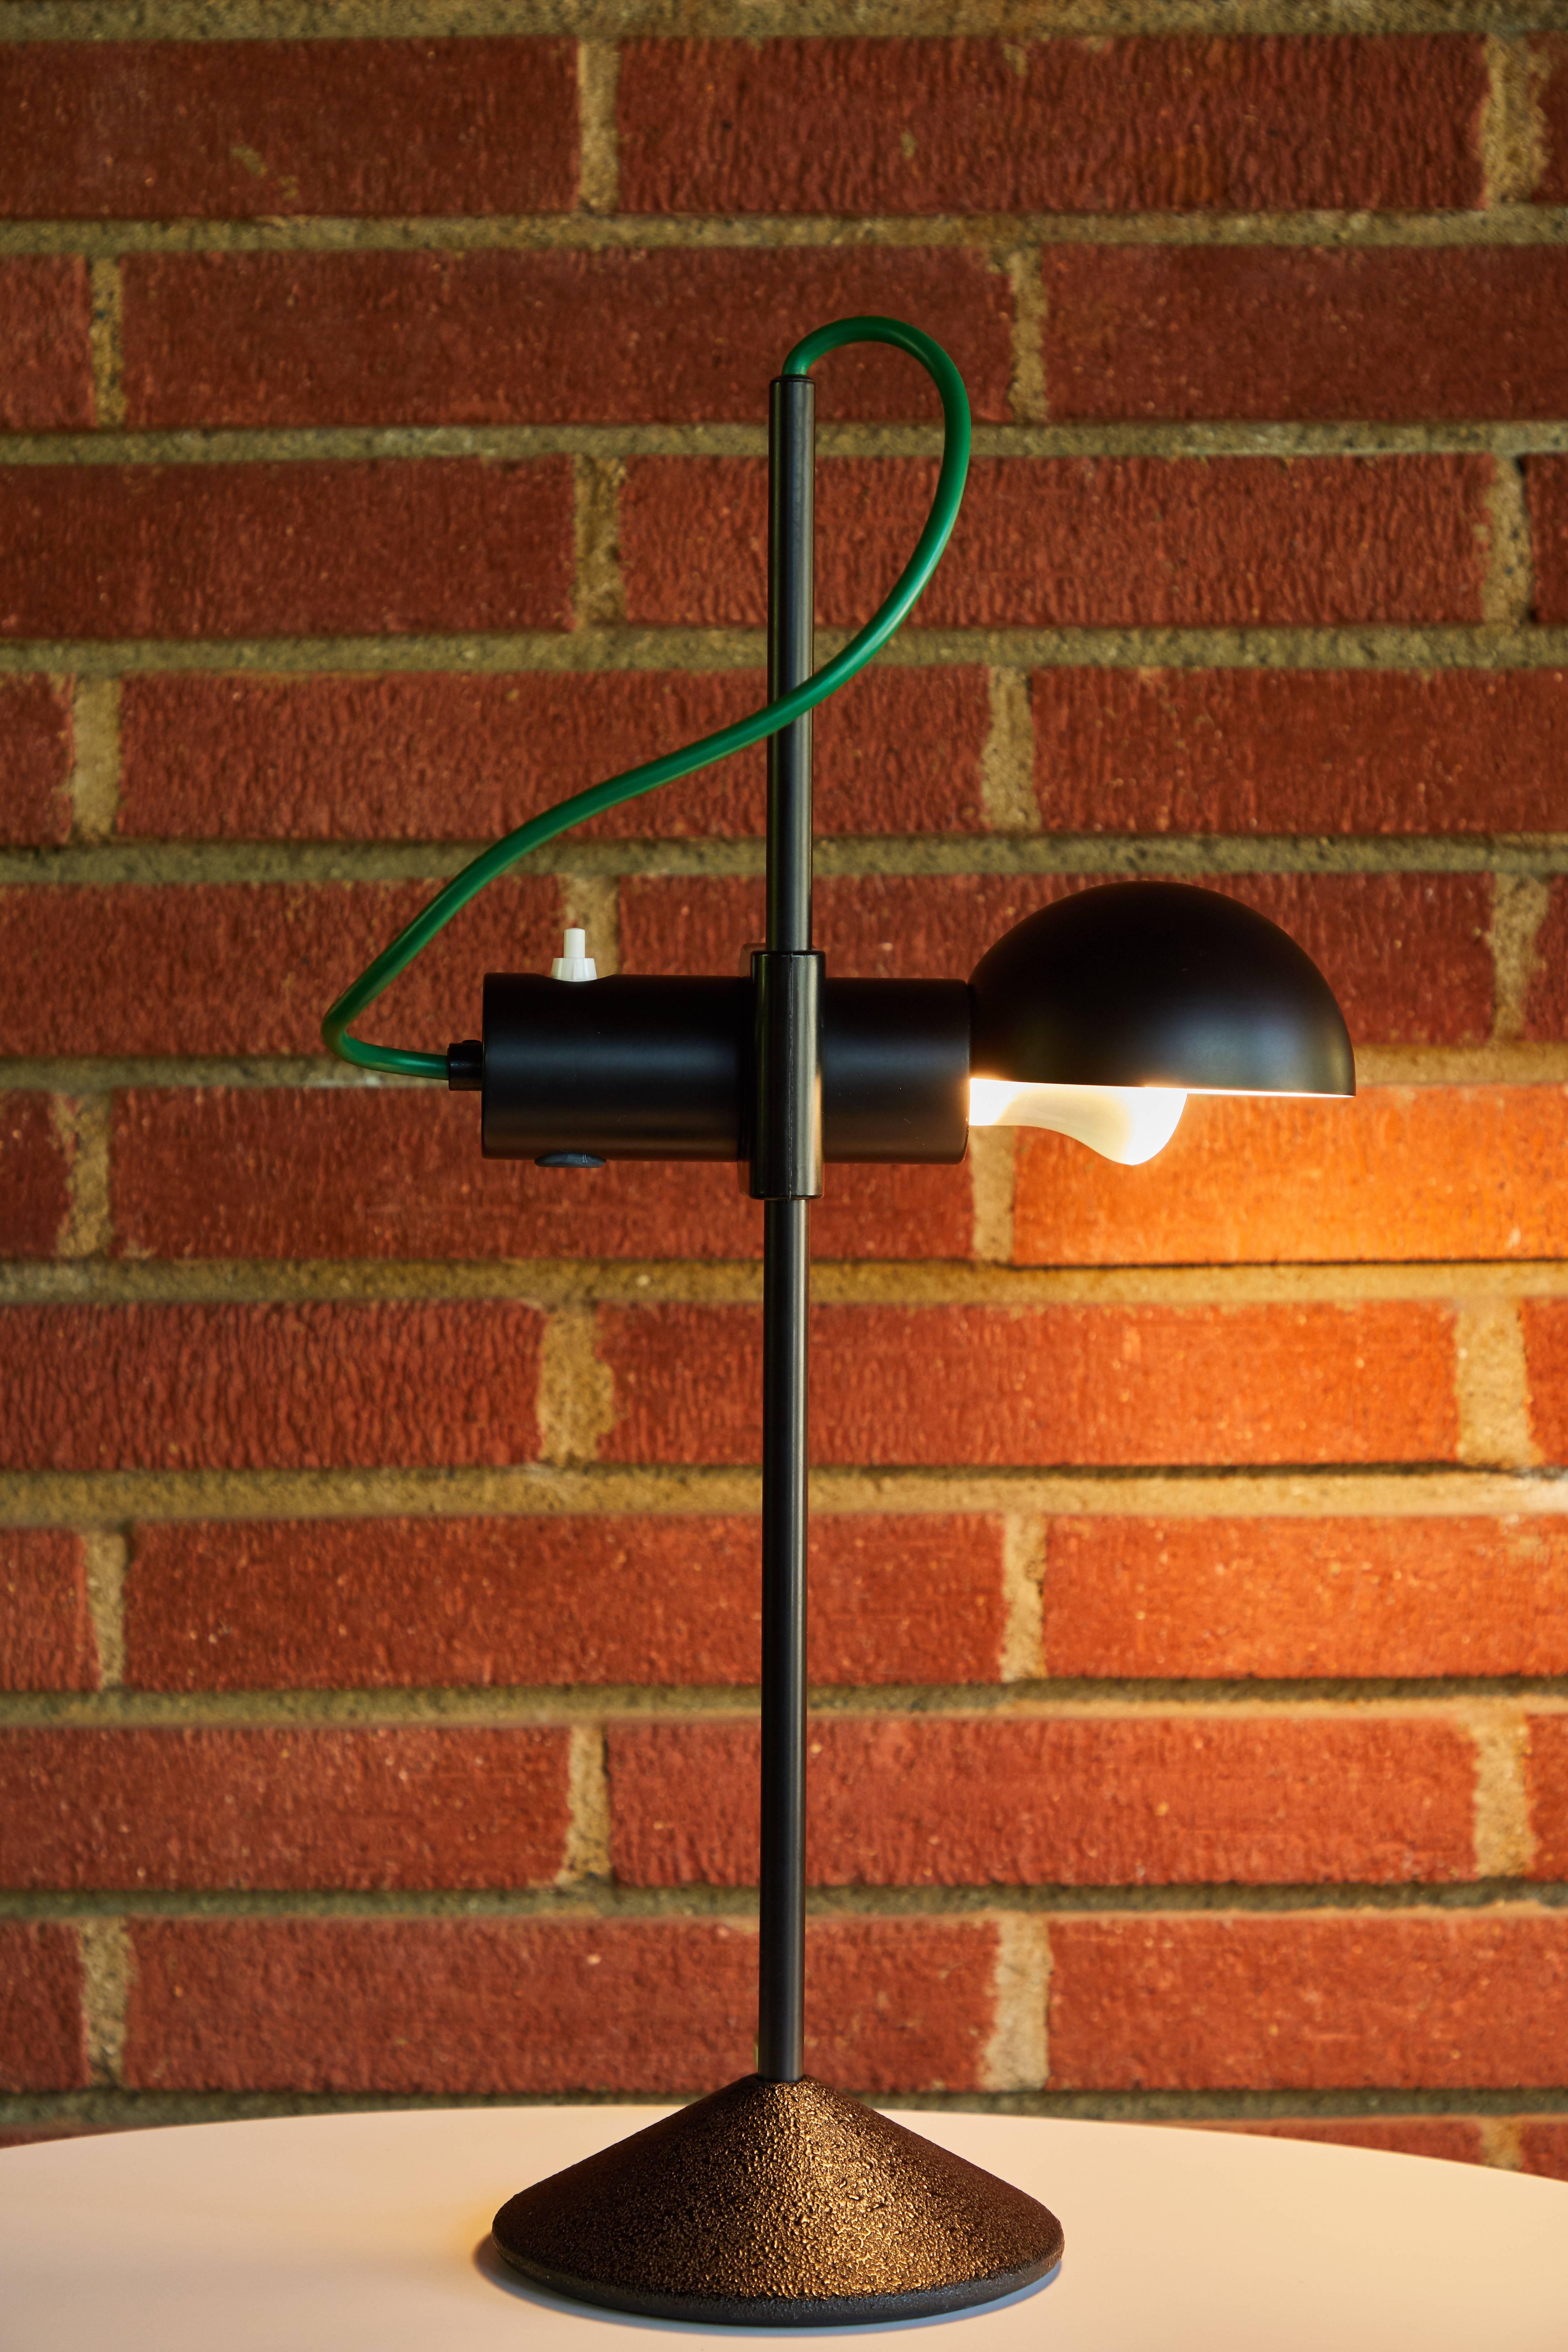 1980s Barbieri & Marianelli table lamp for Tronconi. Executed in black matte metal, black plastic, and green cord. Shade rotates left and right. On/off switch on shade. A surprisingly bold yet refined Italian design, especially for the early 1980s.